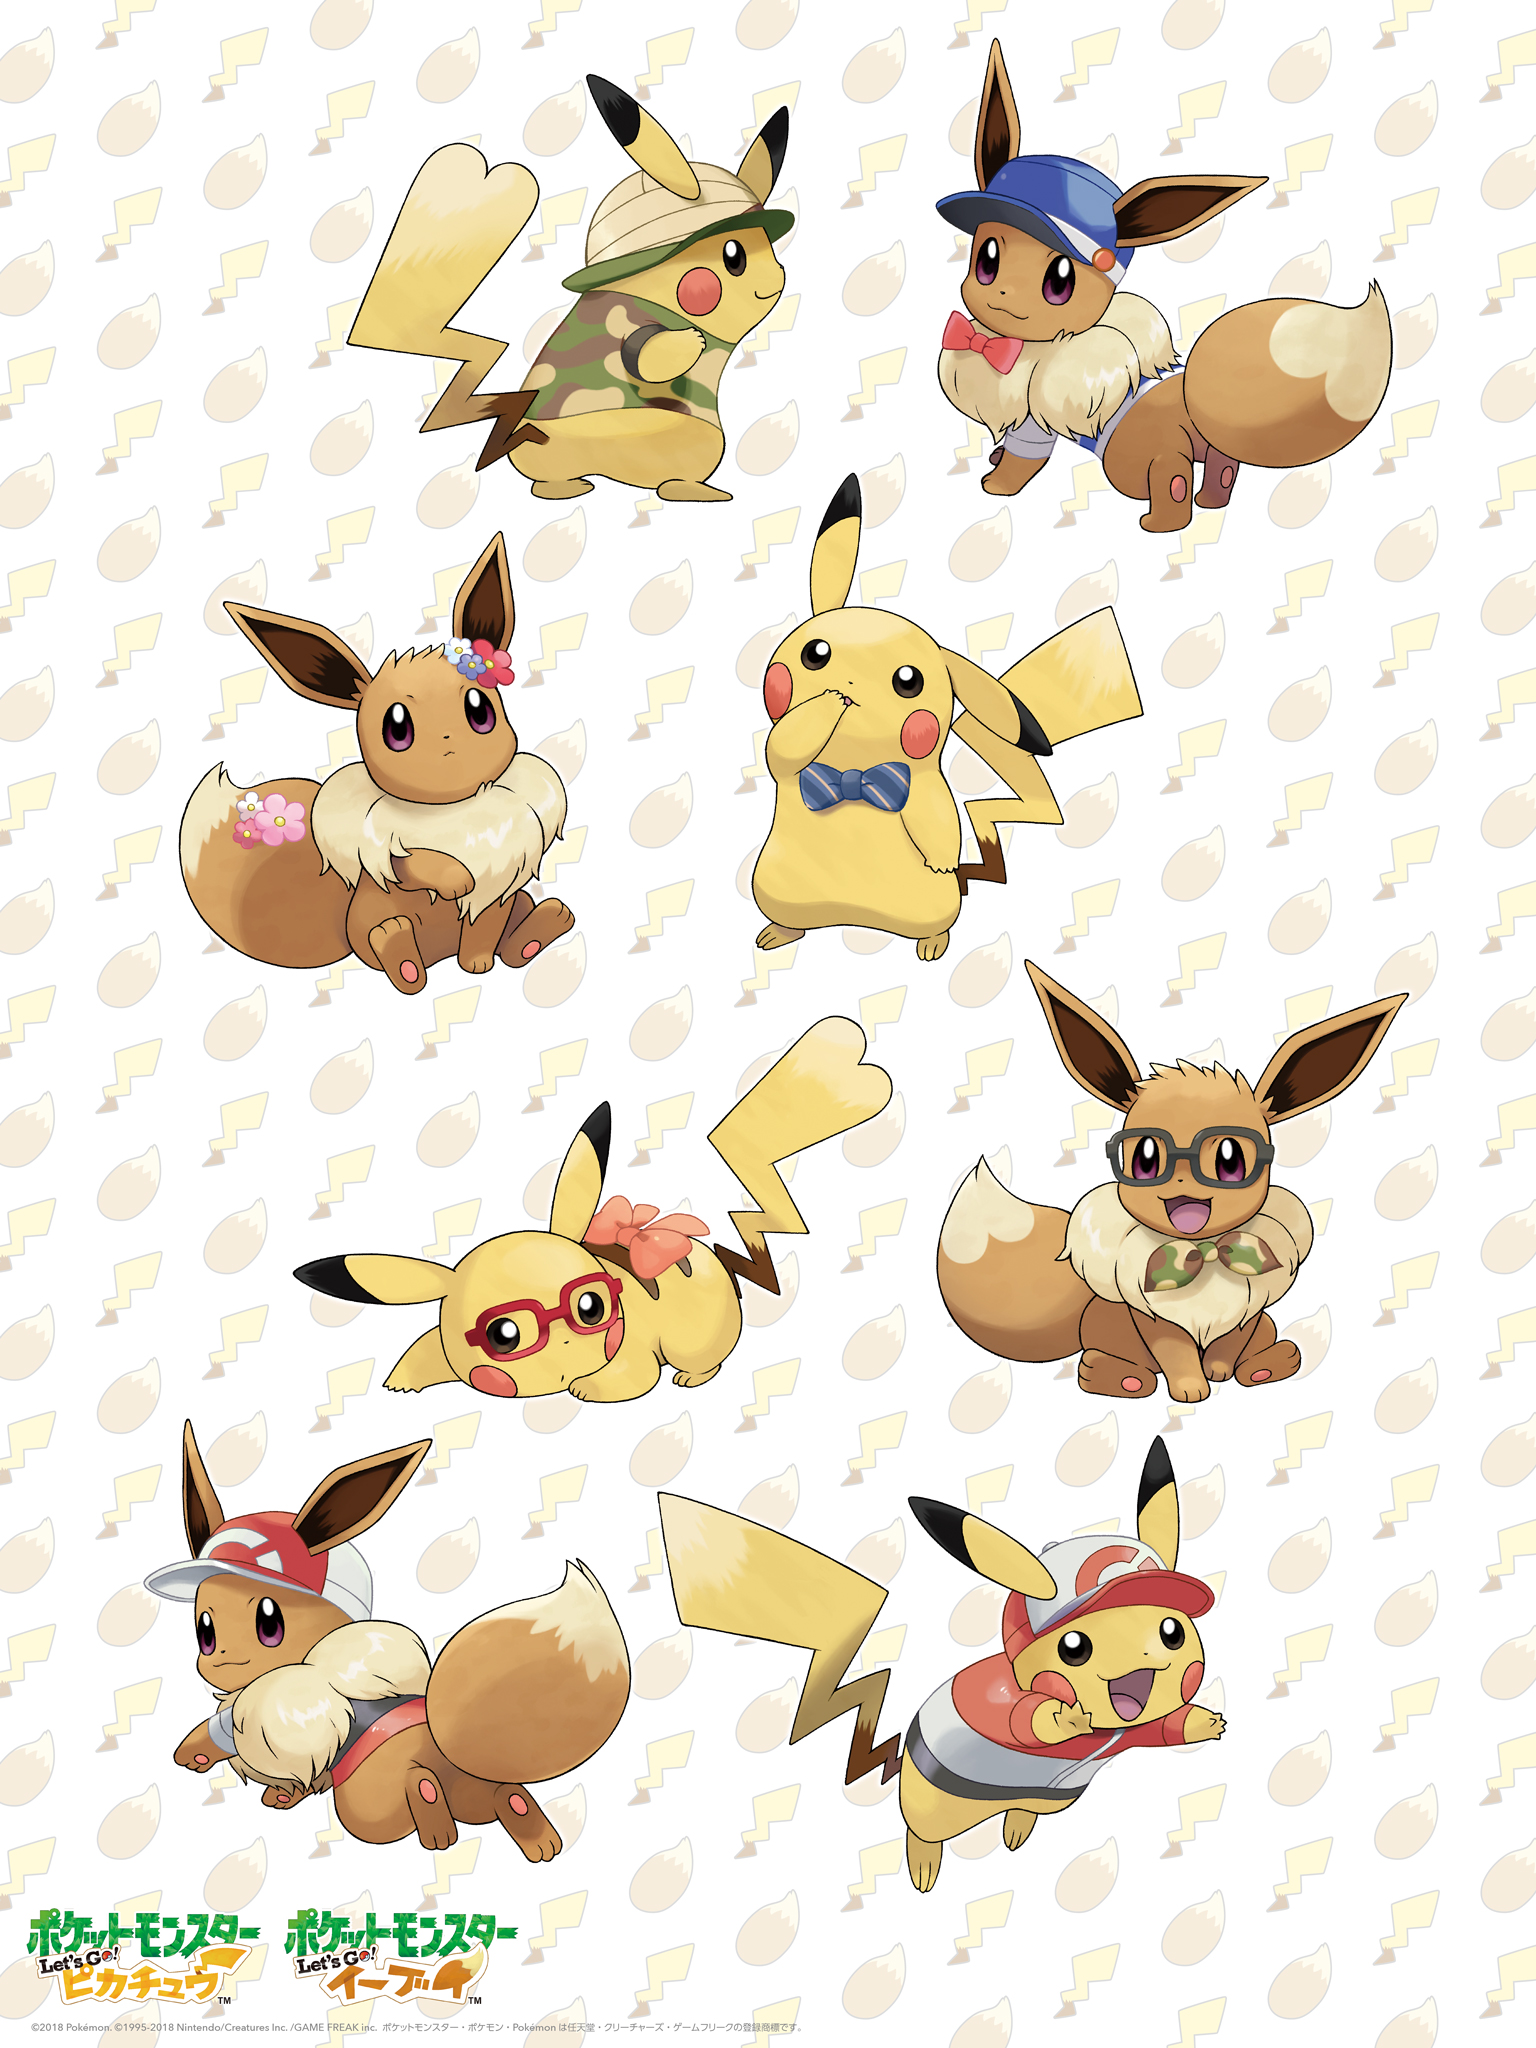 impose Abbreviate Lover Download This Pokemon Let's GO Pikachu/Eevee Wallpaper For Your PC And  Smartphone – NintendoSoup